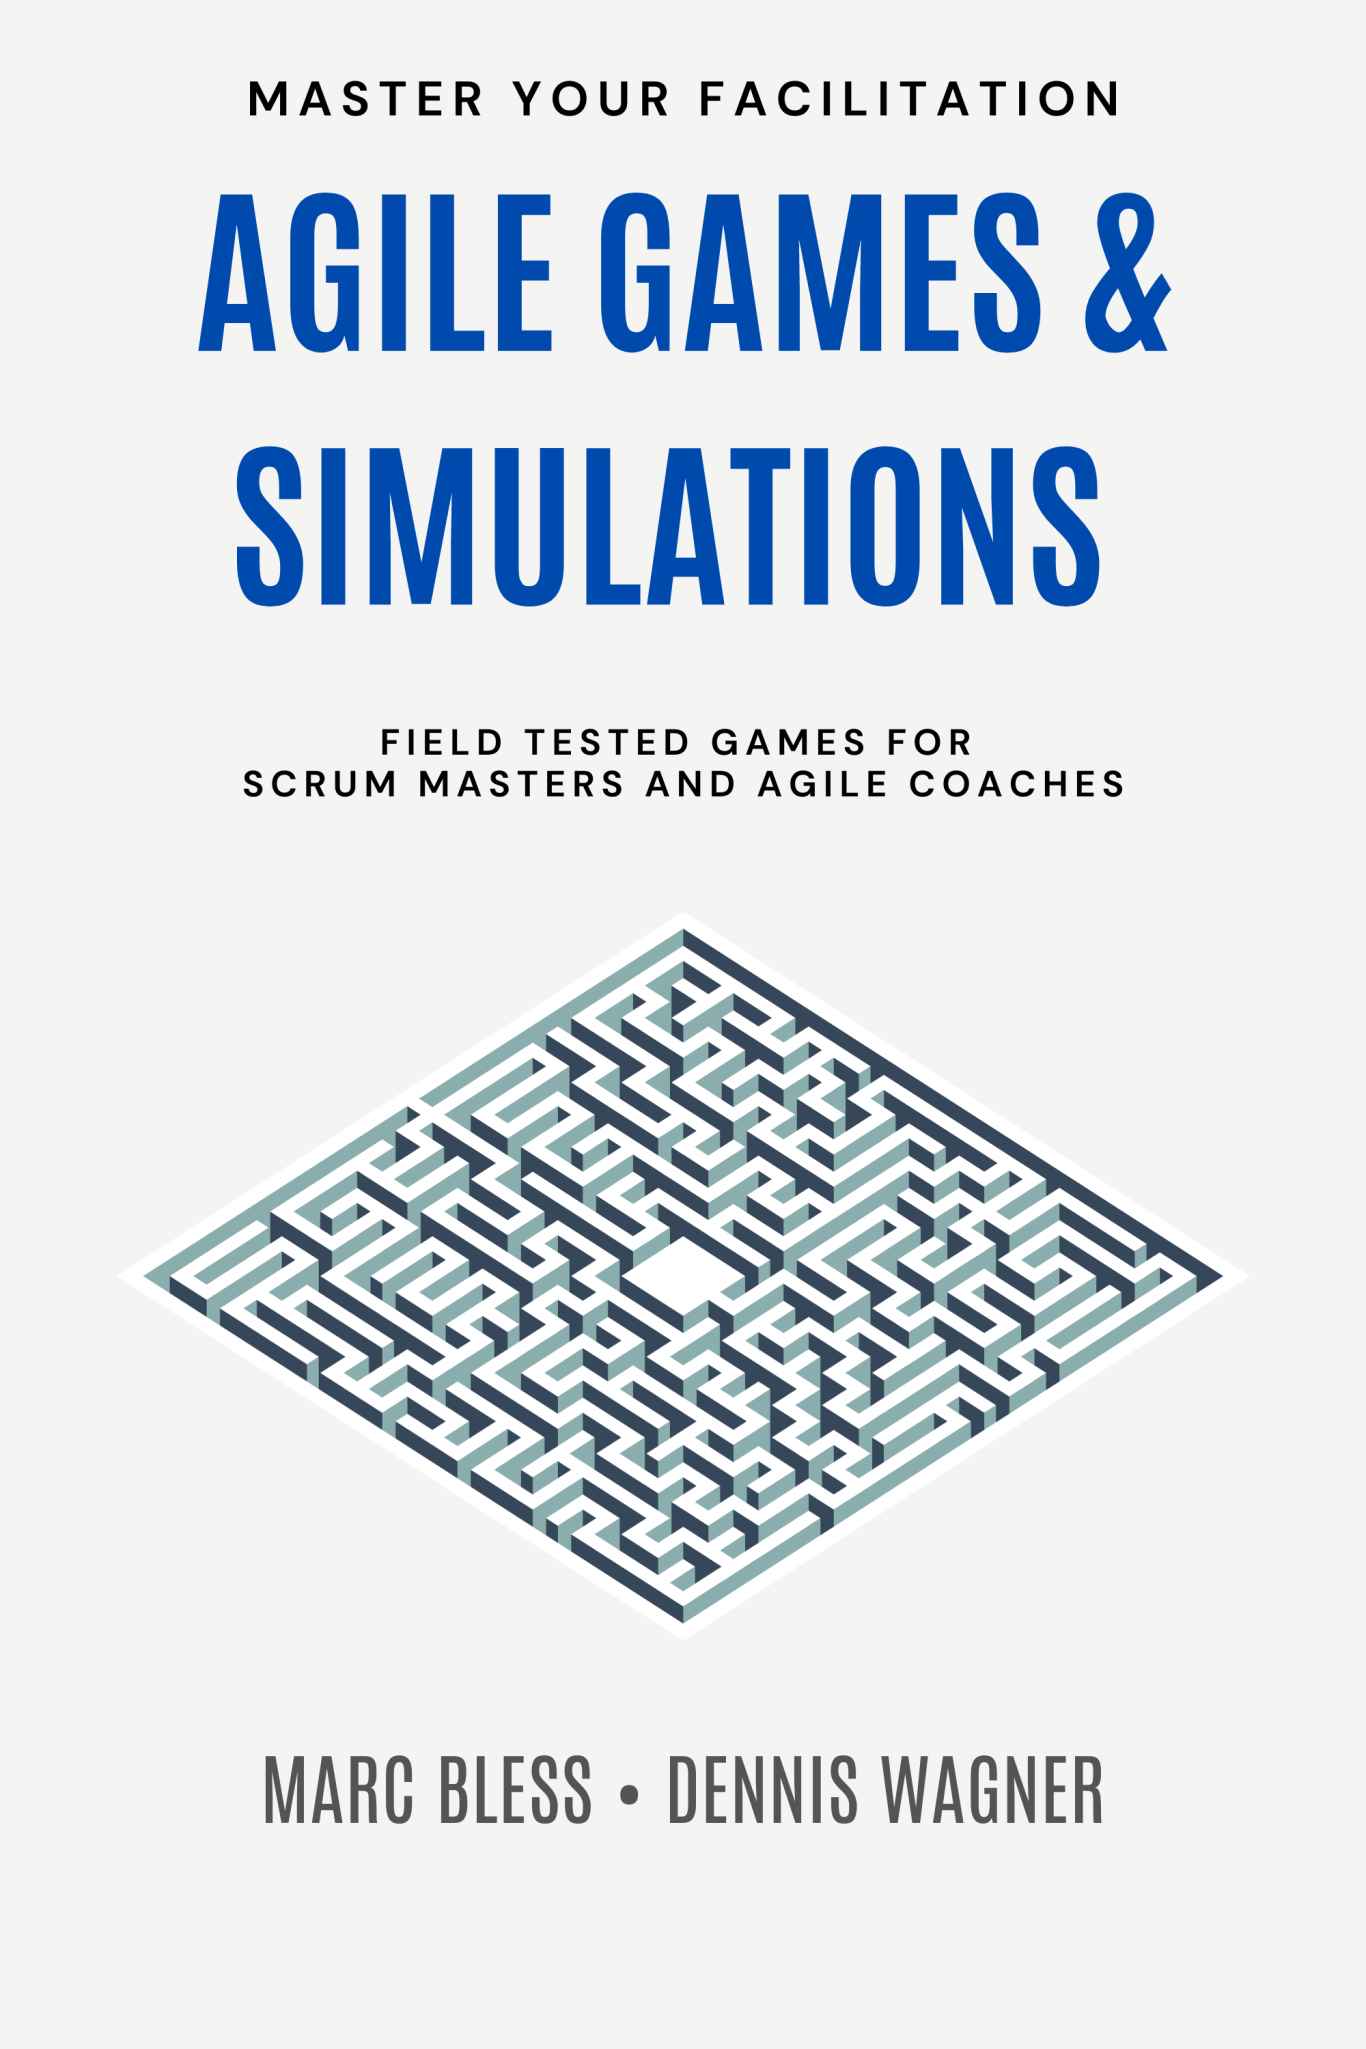 Agile Games and Simulations